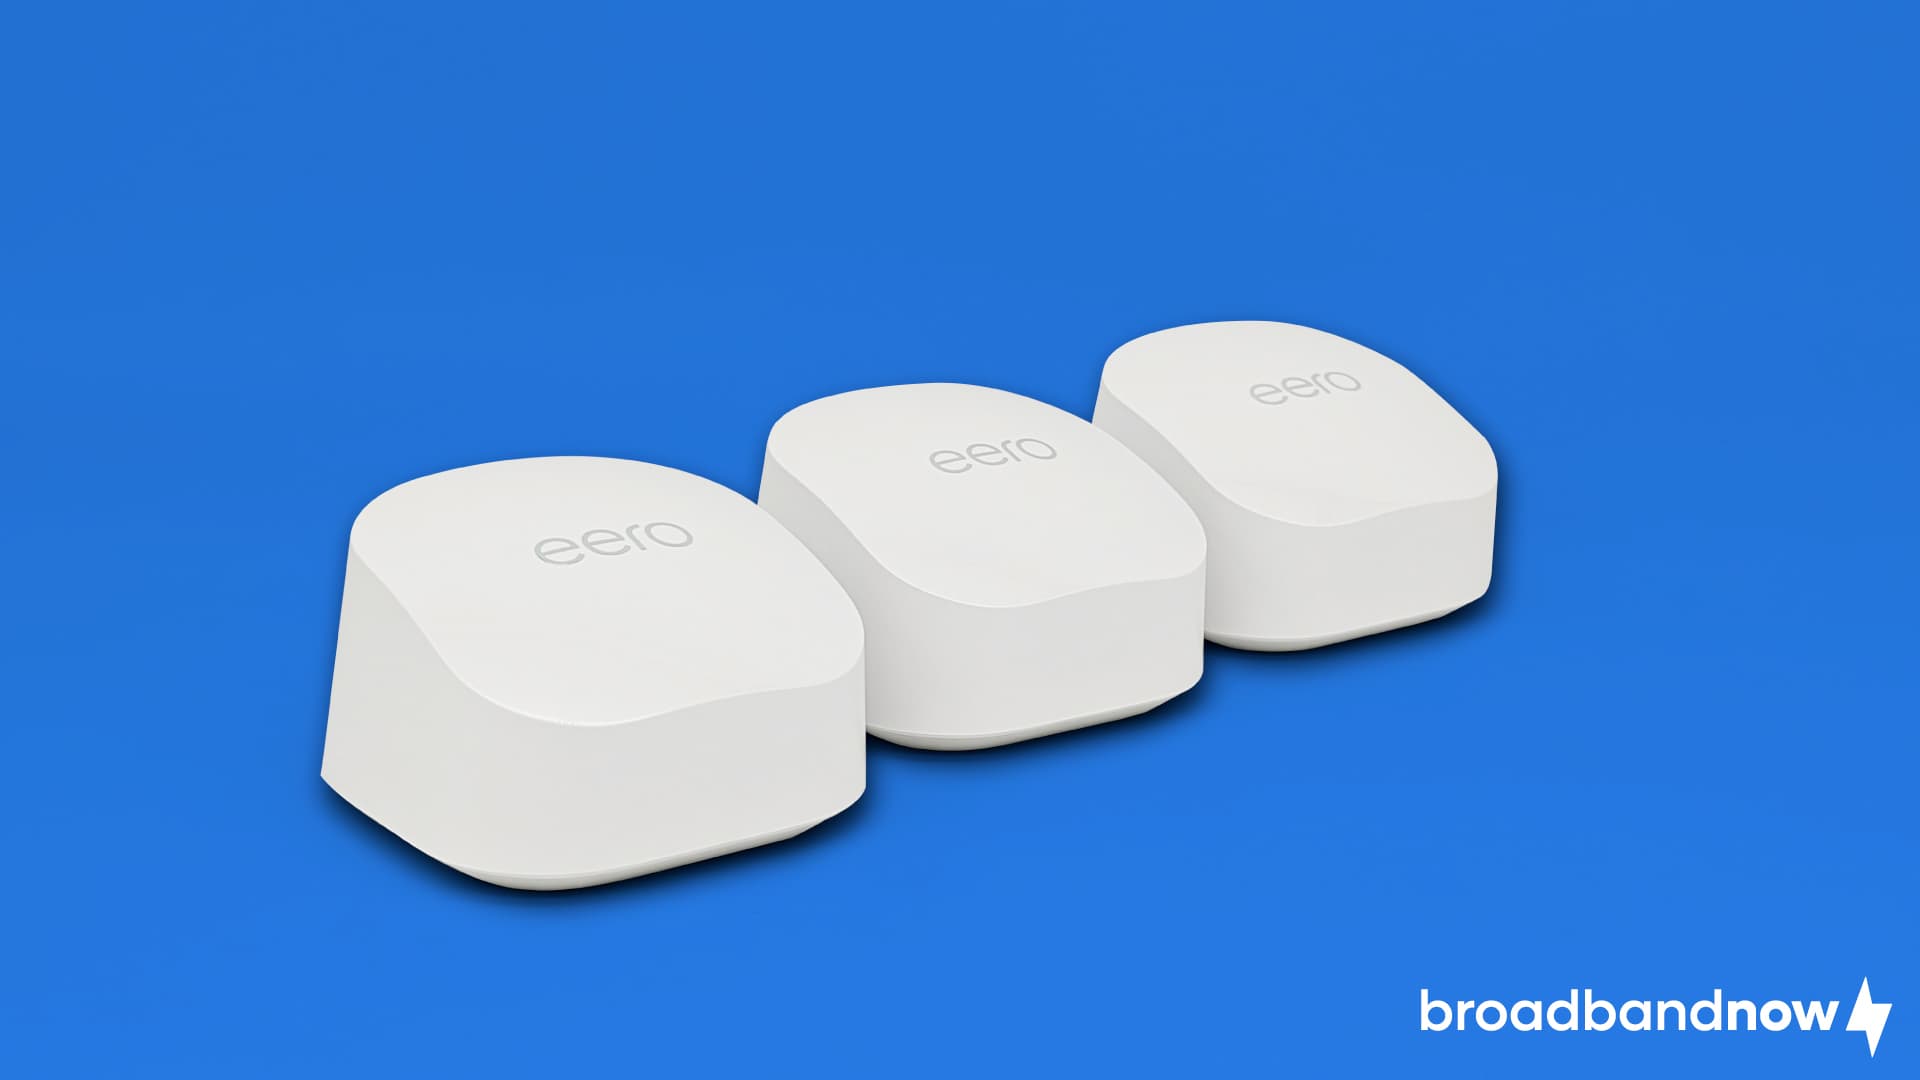 Photo of three Amazon eero 6+ Wi-Fi routers on a blue background